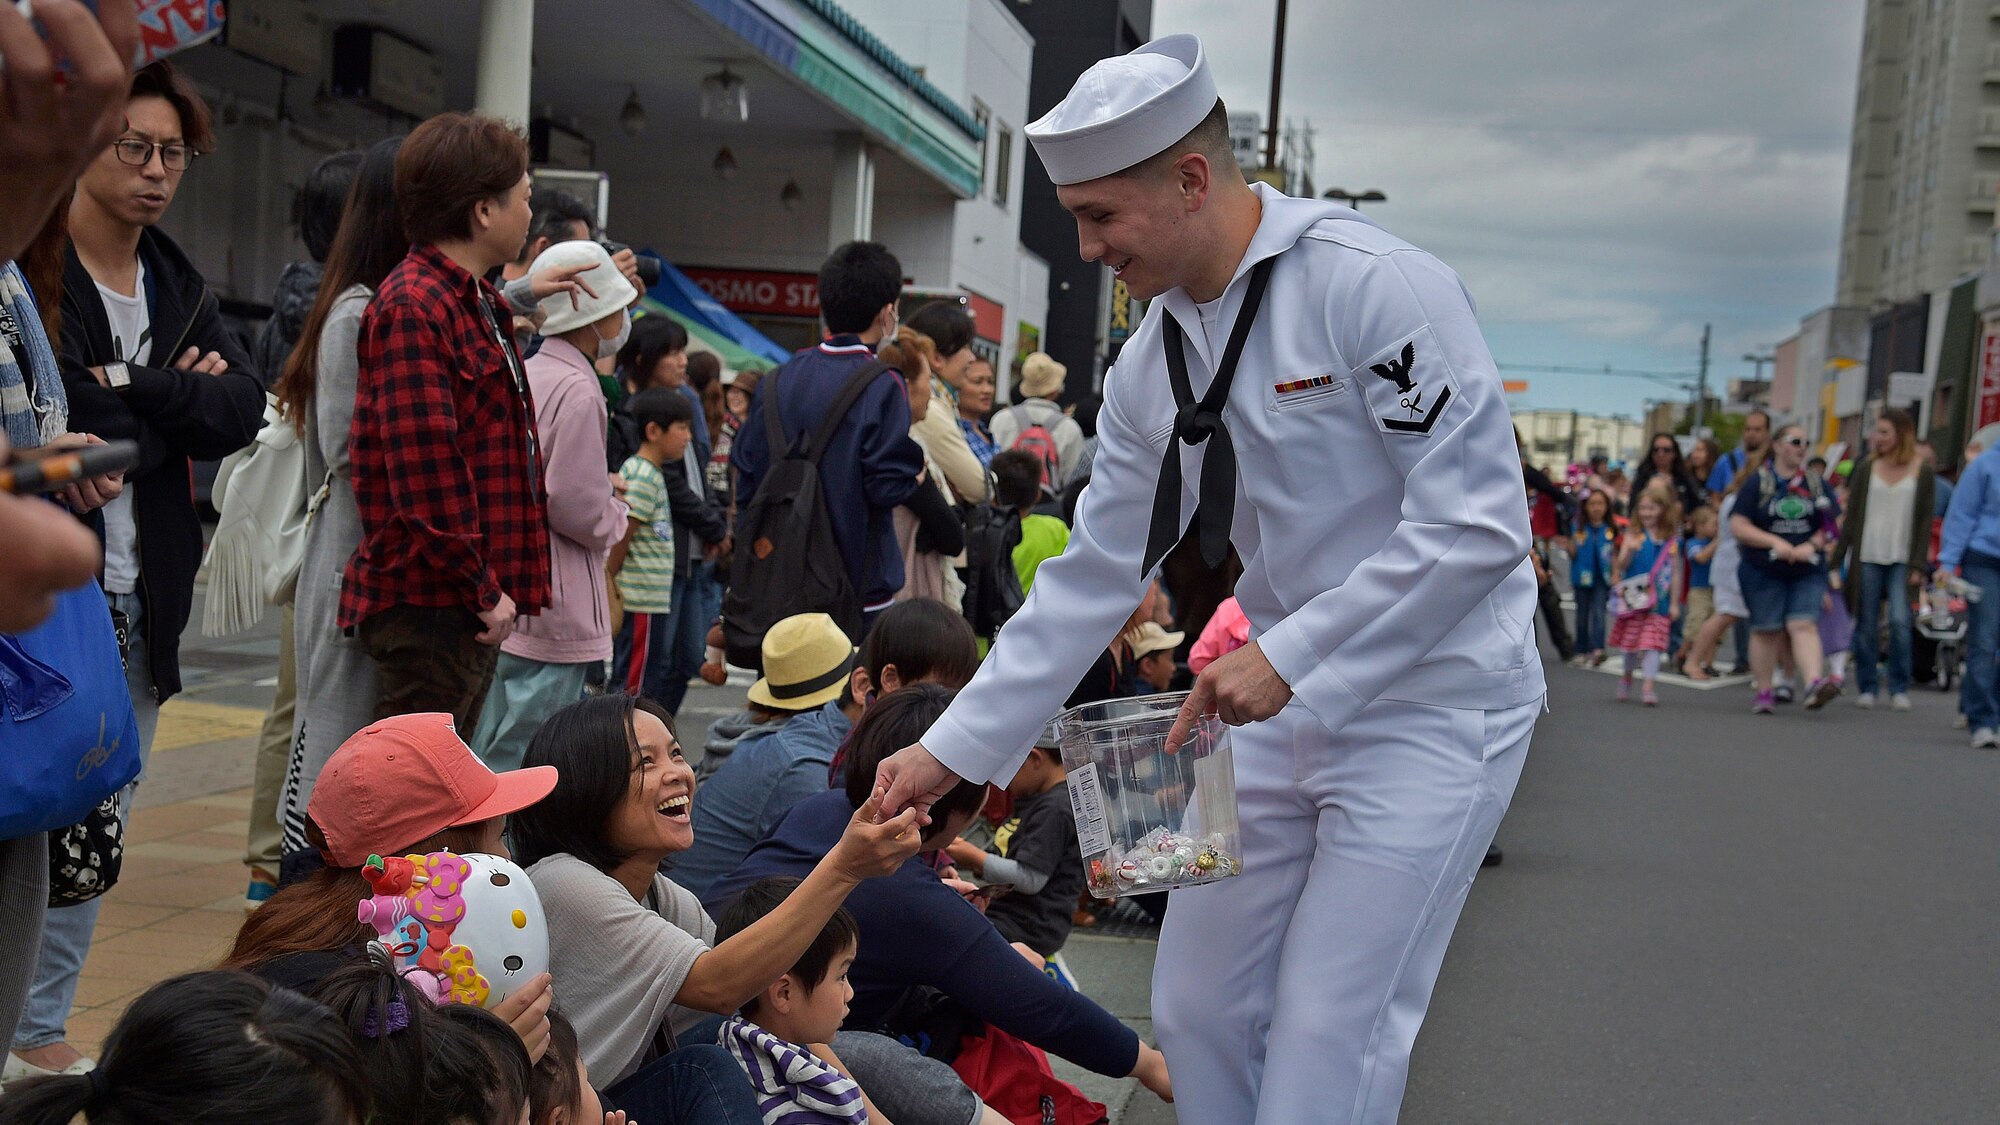 A U.S. Navy Sailor with the Naval Air Facility-Misawa hands out candy to a Japanese family during the 28th Annual American Day parade in Misawa City, Japan, June 5, 2016. Events like these are important as they afford Misawa neighbors, American and Japanese alike, opportunities to interact in a relaxed environment specifically planned for building friendships. More than 80,000 attendees from across the Aomori Prefecture traveled to Misawa City to enjoy American and Japanese culture. (U.S. Air Force photo by Senior Airman Deana Heitzman)